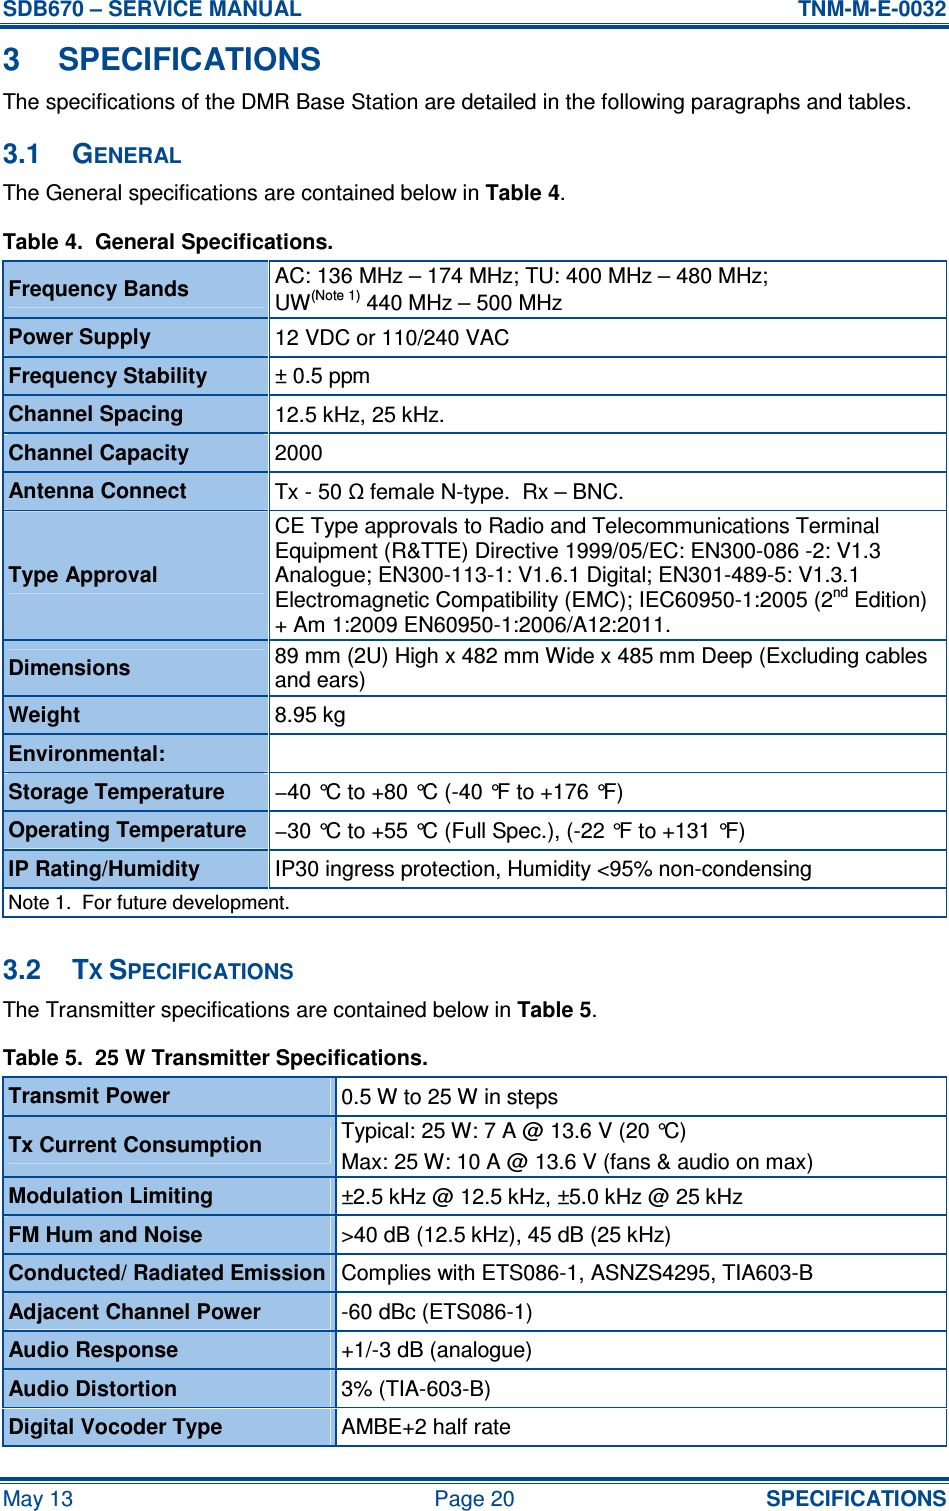 SDB670 – SERVICE MANUAL  TNM-M-E-0032 May 13  Page 20  SPECIFICATIONS 3  SPECIFICATIONS The specifications of the DMR Base Station are detailed in the following paragraphs and tables. 3.1  GENERAL The General specifications are contained below in Table 4. Table 4.  General Specifications. Frequency Bands  AC: 136 MHz – 174 MHz; TU: 400 MHz – 480 MHz; UW(Note 1) 440 MHz – 500 MHz Power Supply  12 VDC or 110/240 VAC  Frequency Stability  ± 0.5 ppm Channel Spacing  12.5 kHz, 25 kHz. Channel Capacity  2000 Antenna Connect  Tx - 50 Ω female N-type.  Rx – BNC. Type Approval CE Type approvals to Radio and Telecommunications Terminal Equipment (R&amp;TTE) Directive 1999/05/EC: EN300-086 -2: V1.3 Analogue; EN300-113-1: V1.6.1 Digital; EN301-489-5: V1.3.1 Electromagnetic Compatibility (EMC); IEC60950-1:2005 (2nd Edition) + Am 1:2009 EN60950-1:2006/A12:2011. Dimensions  89 mm (2U) High x 482 mm Wide x 485 mm Deep (Excluding cables and ears) Weight  8.95 kg Environmental:   Storage Temperature  −40 °C to +80 °C (-40 °F to +176 °F) Operating Temperature  −30 °C to +55 °C (Full Spec.), (-22 °F to +131 °F) IP Rating/Humidity  IP30 ingress protection, Humidity &lt;95% non-condensing Note 1.  For future development.  3.2  TX SPECIFICATIONS The Transmitter specifications are contained below in Table 5. Table 5.  25 W Transmitter Specifications. Transmit Power  0.5 W to 25 W in steps Typical: 25 W: 7 A @ 13.6 V (20 °C) Tx Current Consumption  Max: 25 W: 10 A @ 13.6 V (fans &amp; audio on max) Modulation Limiting  ±2.5 kHz @ 12.5 kHz, ±5.0 kHz @ 25 kHz FM Hum and Noise  &gt;40 dB (12.5 kHz), 45 dB (25 kHz) Conducted/ Radiated Emission Complies with ETS086-1, ASNZS4295, TIA603-B Adjacent Channel Power  -60 dBc (ETS086-1) Audio Response  +1/-3 dB (analogue) Audio Distortion  3% (TIA-603-B) Digital Vocoder Type  AMBE+2 half rate 